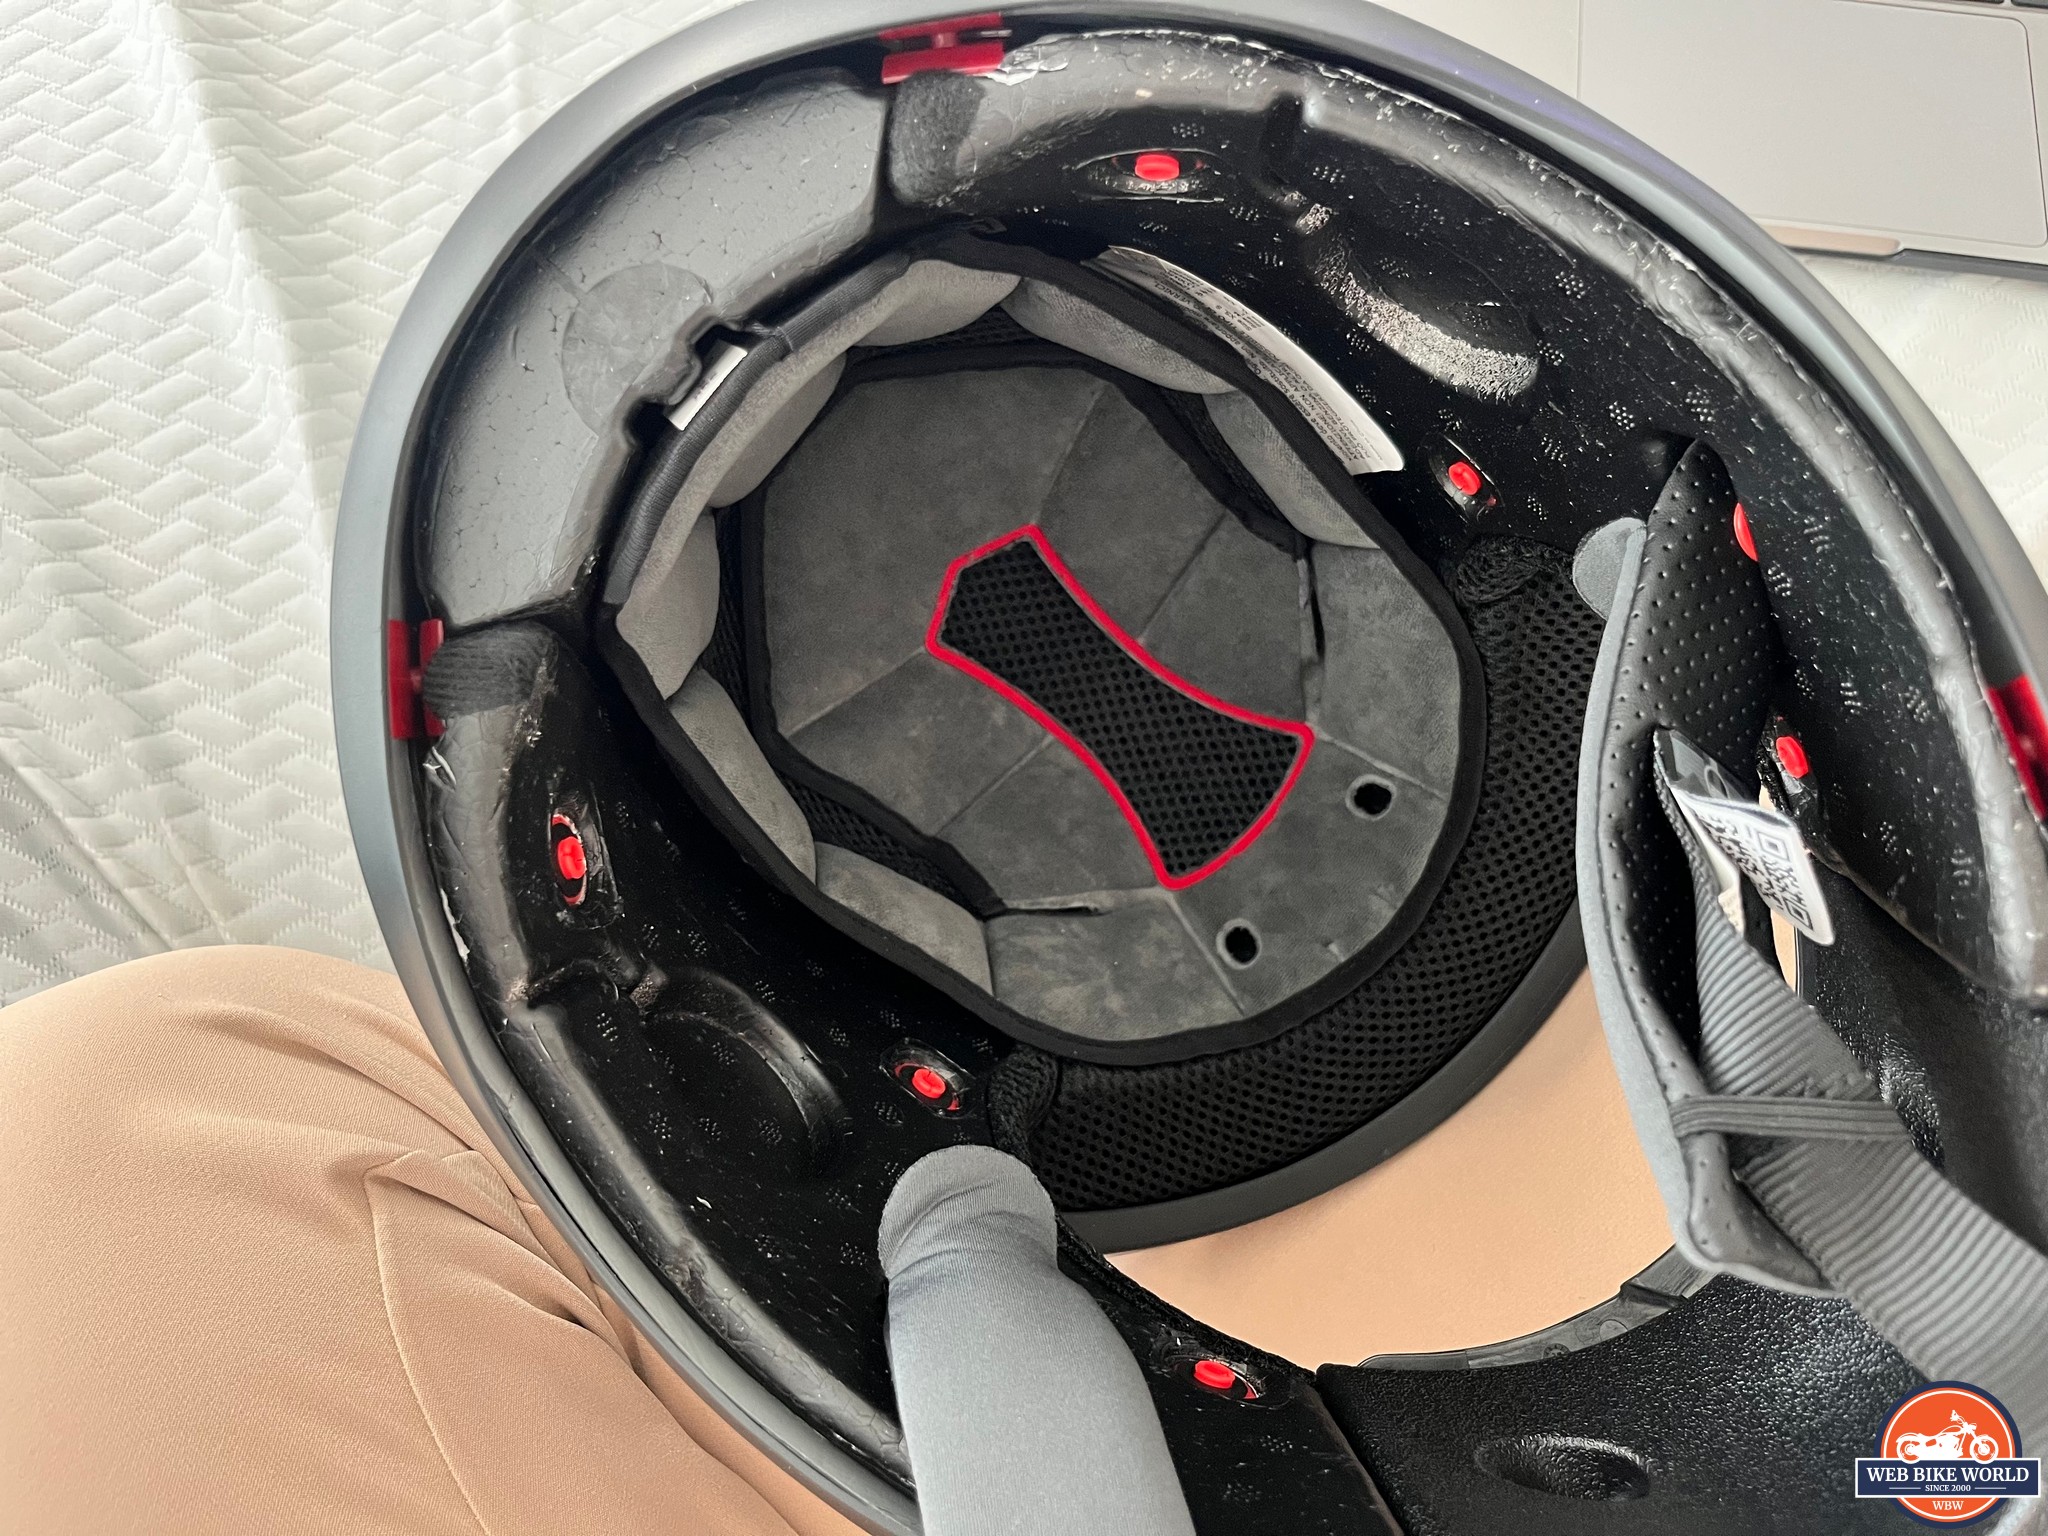 Interior liner removed from the AGV K6 S helmet